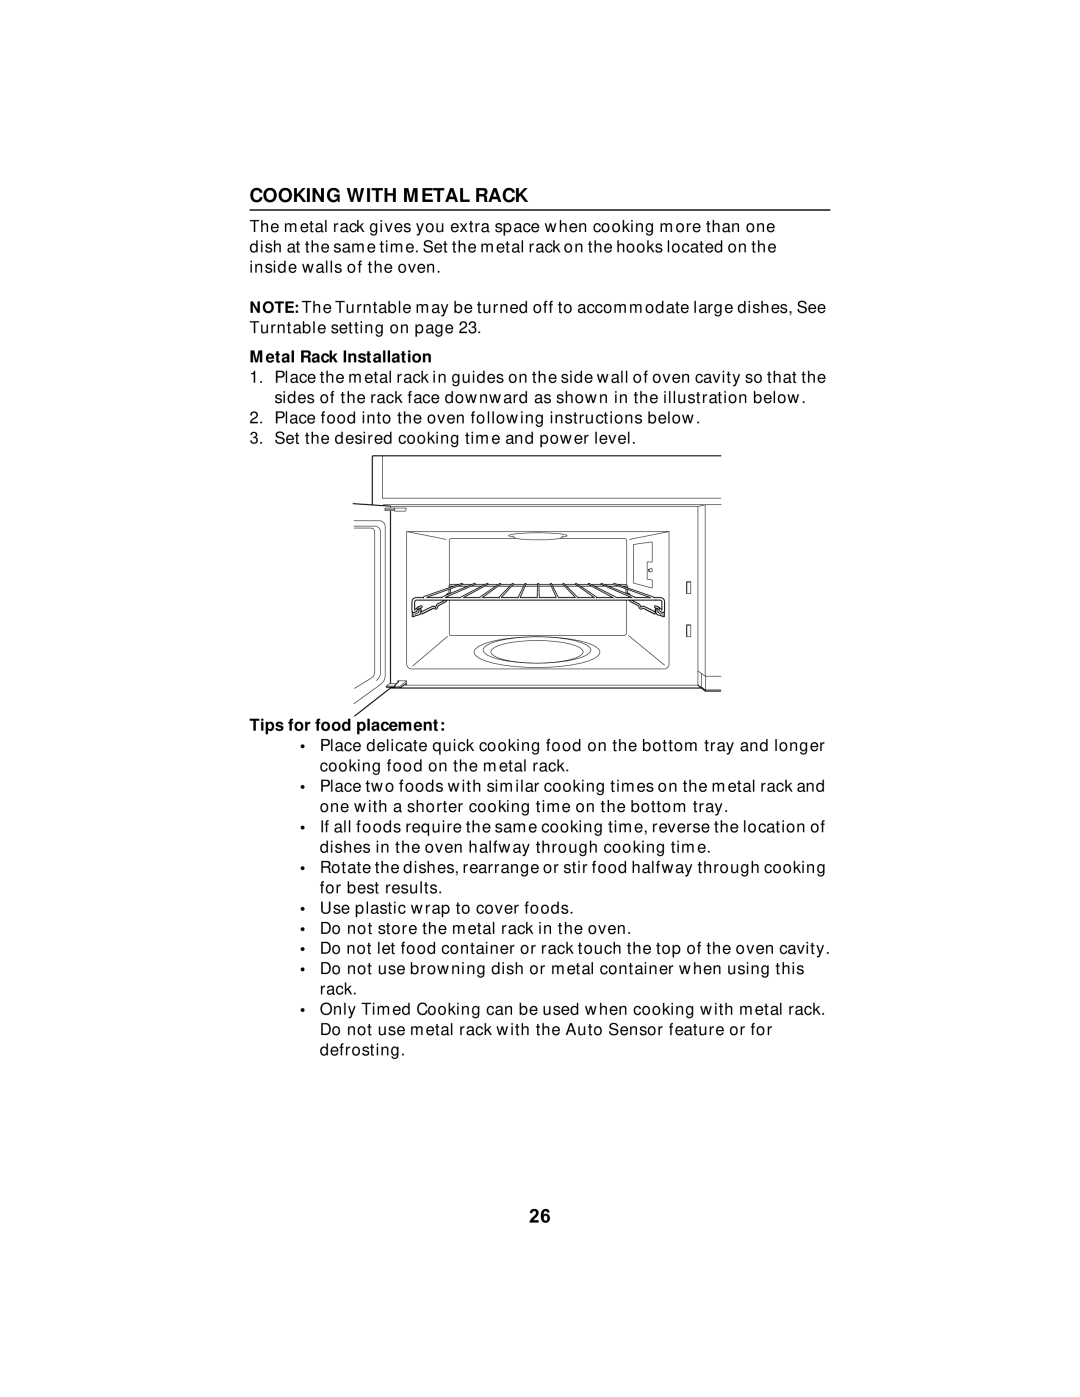 Maytag MMV5100AA manual Cooking With Metal Rack, Metal Rack Installation, Tips for food placement 